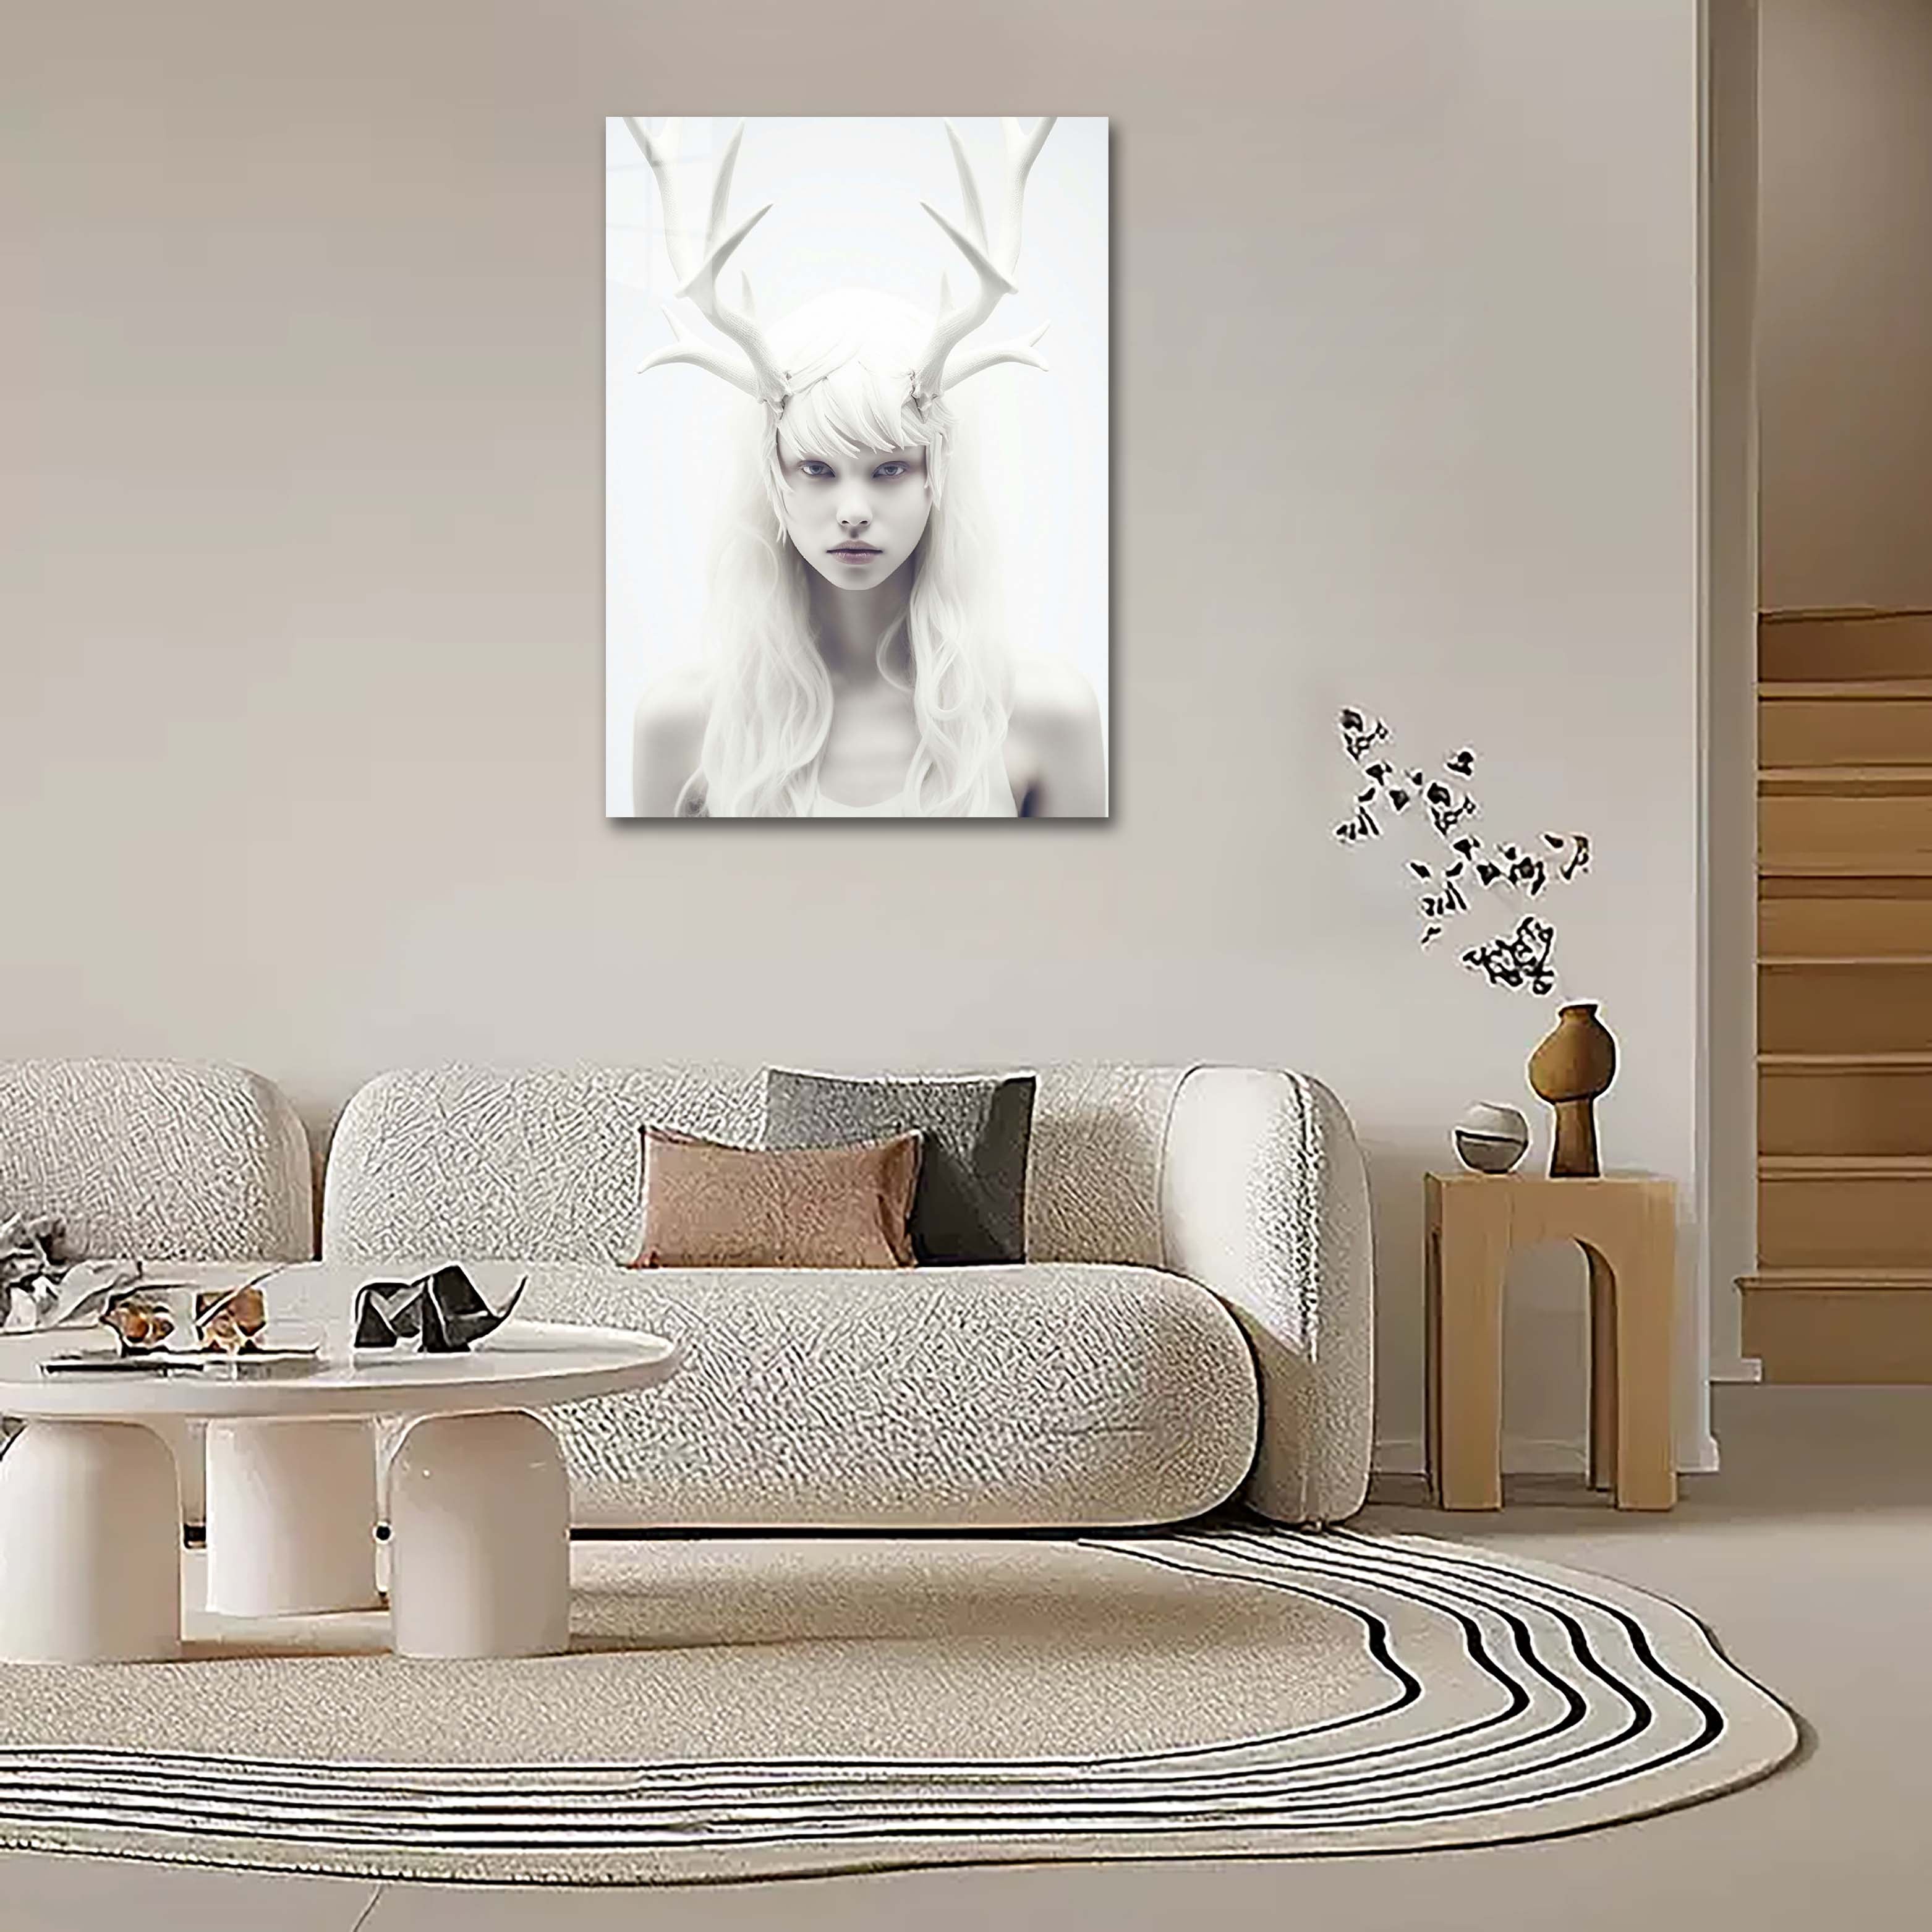 Portrait of albino woman with deer horns-designed by @VanessaGF